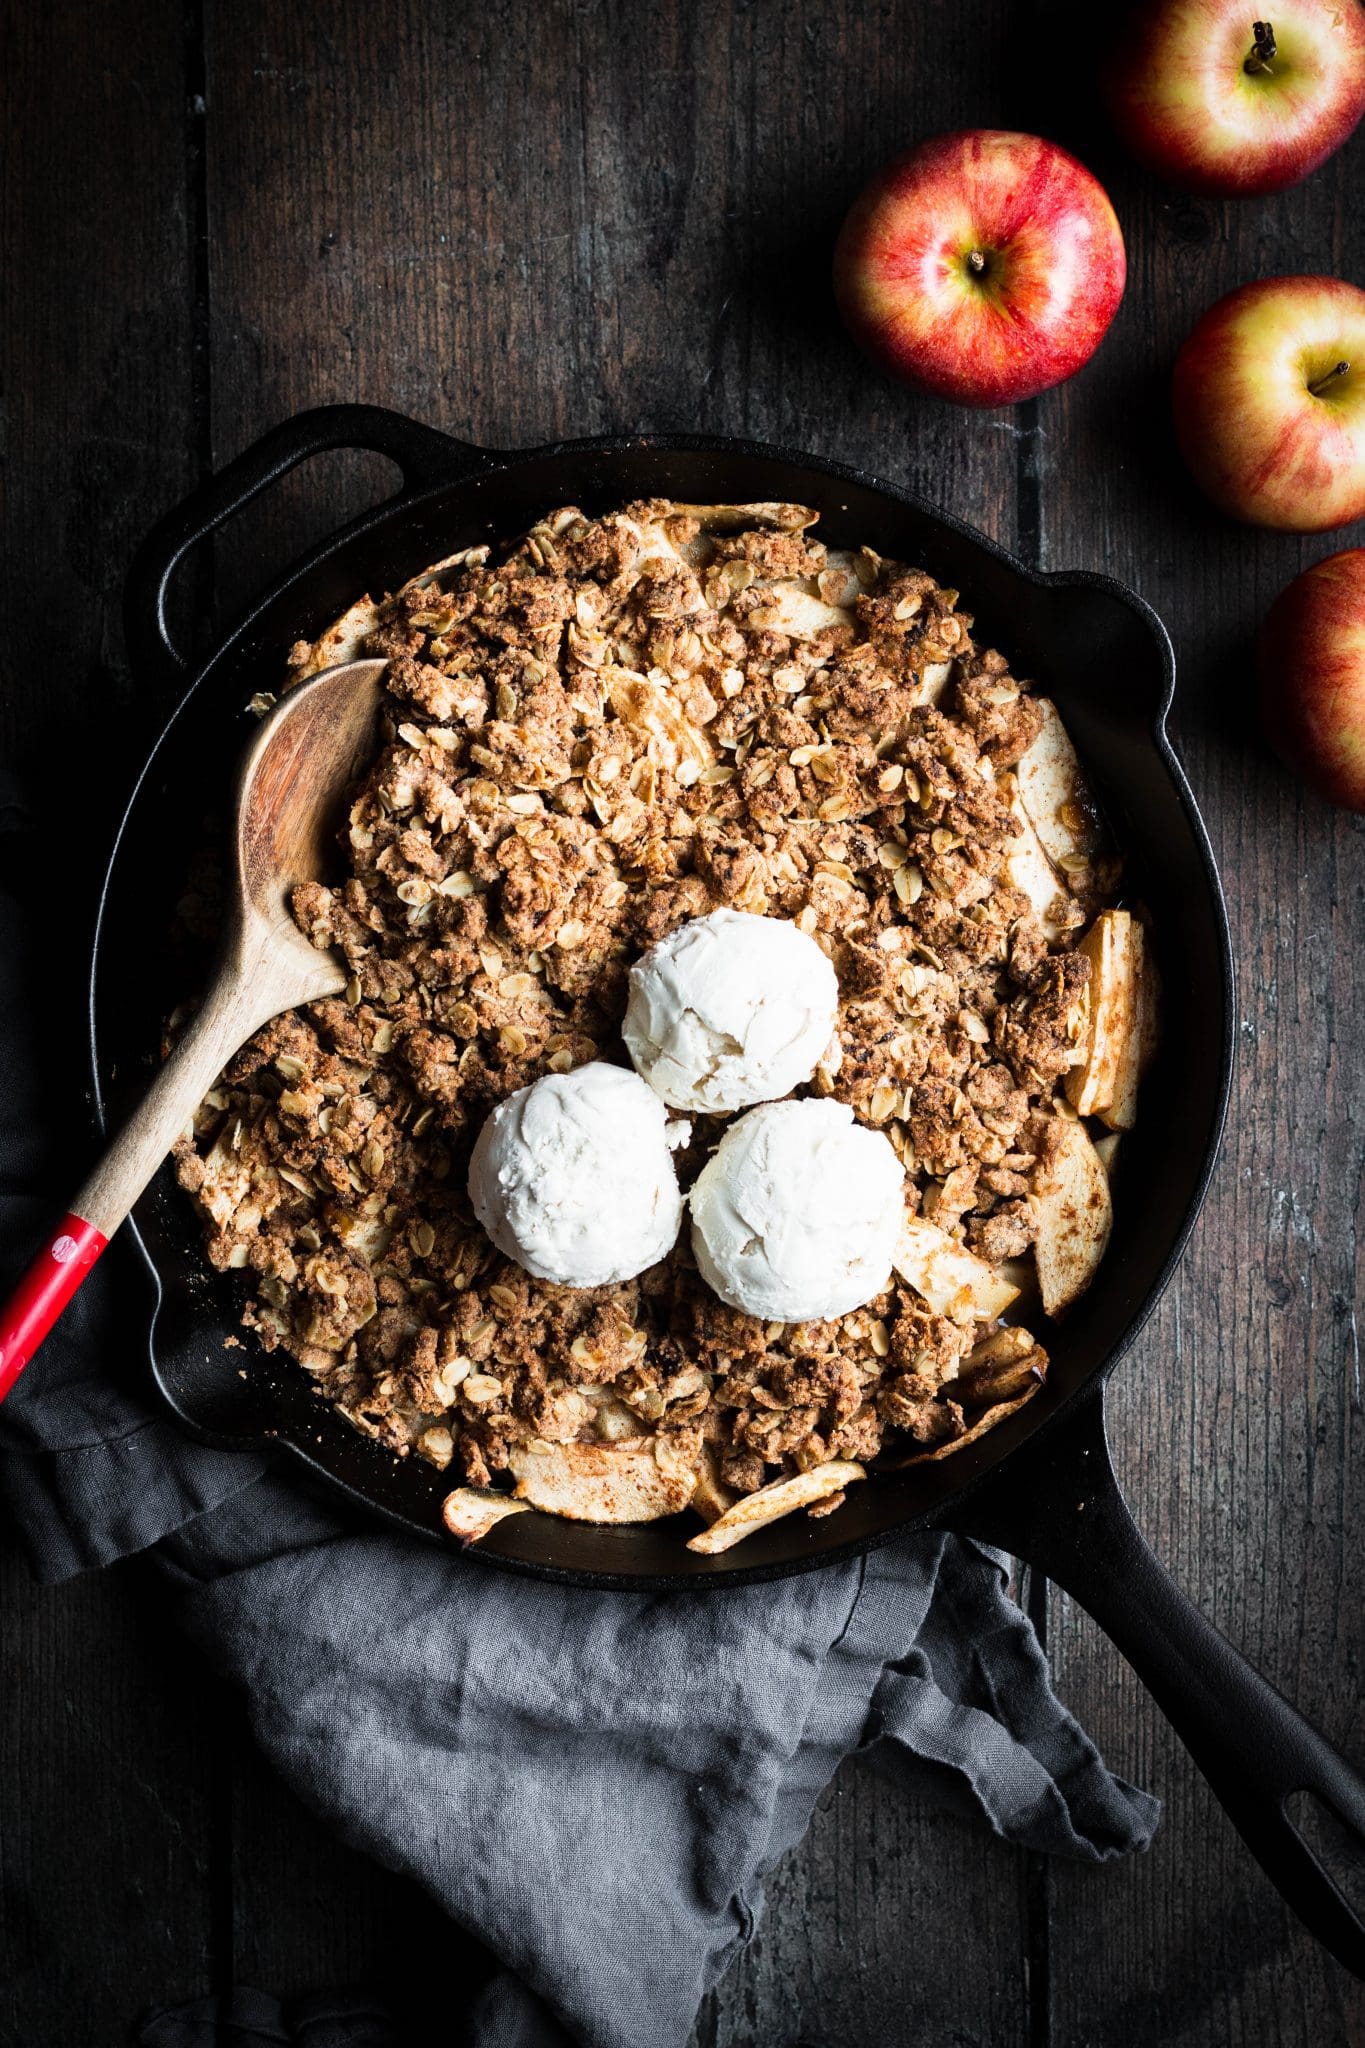 fruit-sweetened apple crisp in a cast-iron skillet with ice cream on top